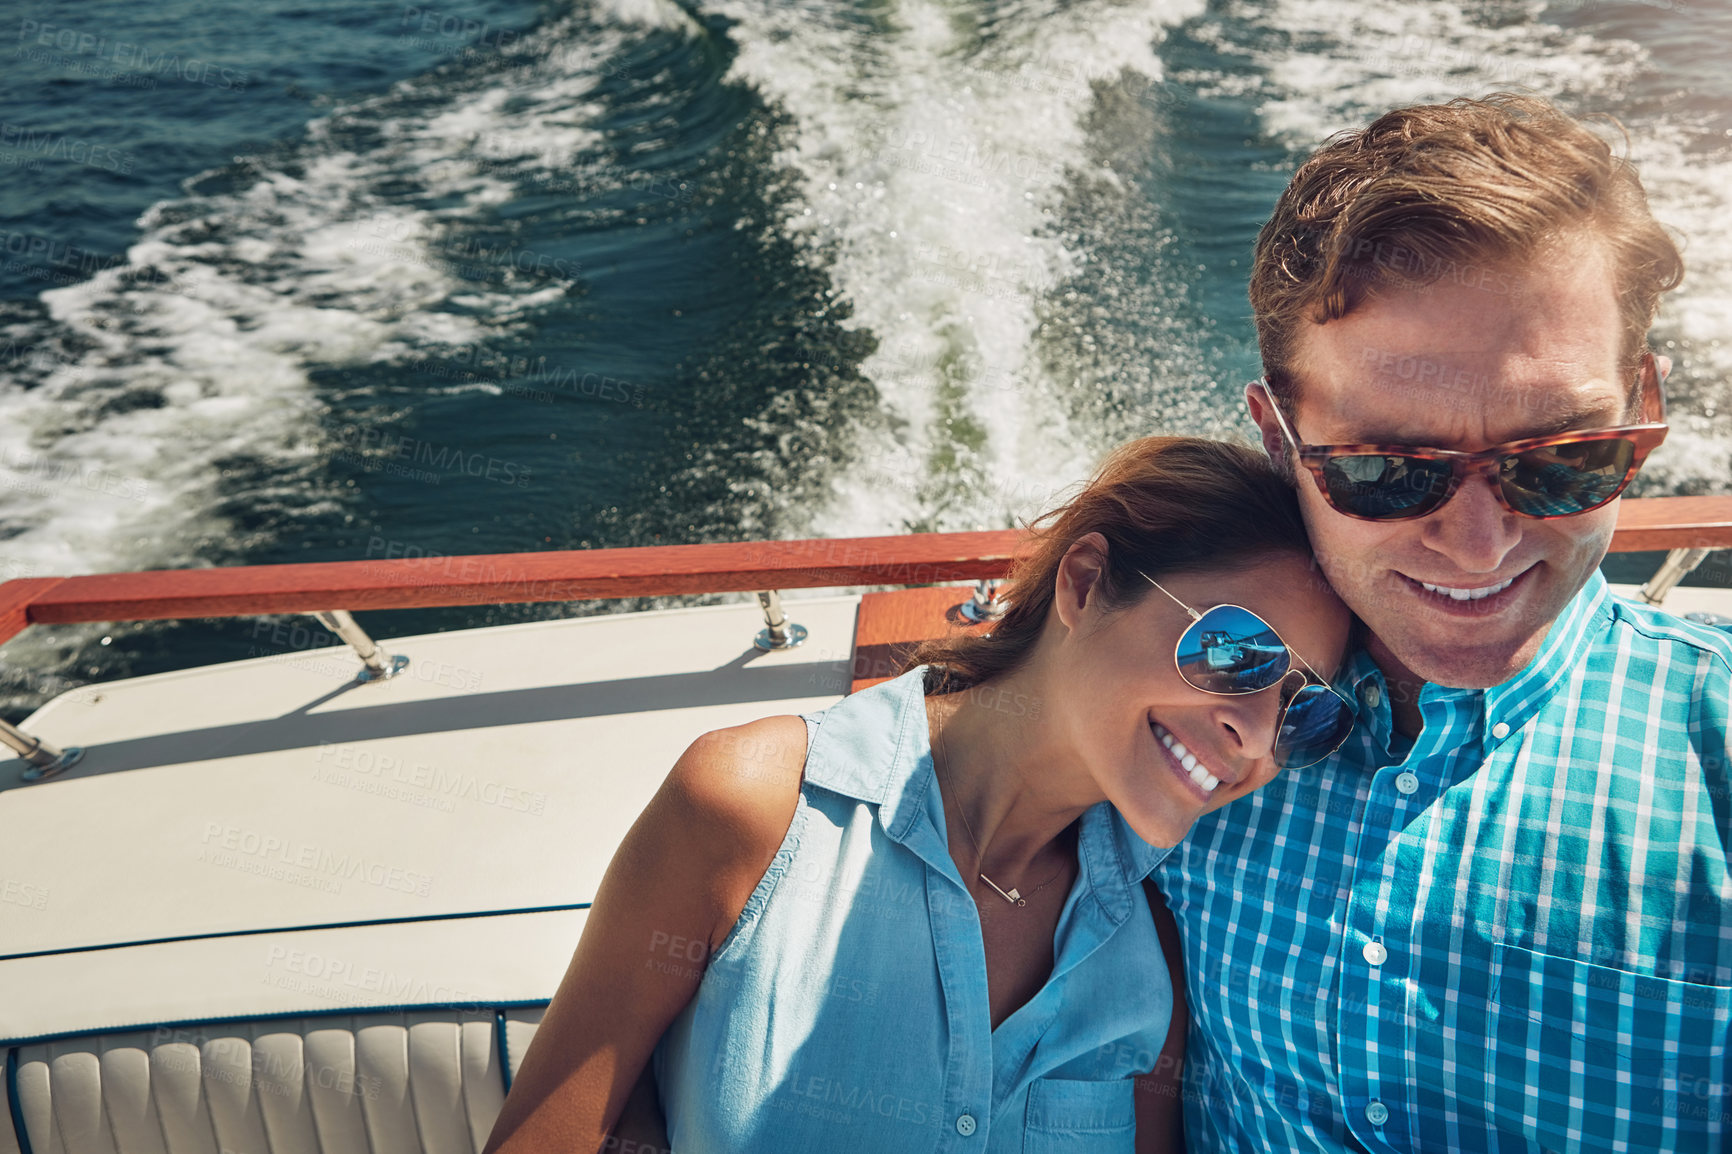 Buy stock photo Shot of a young couple spending time together on a yacht